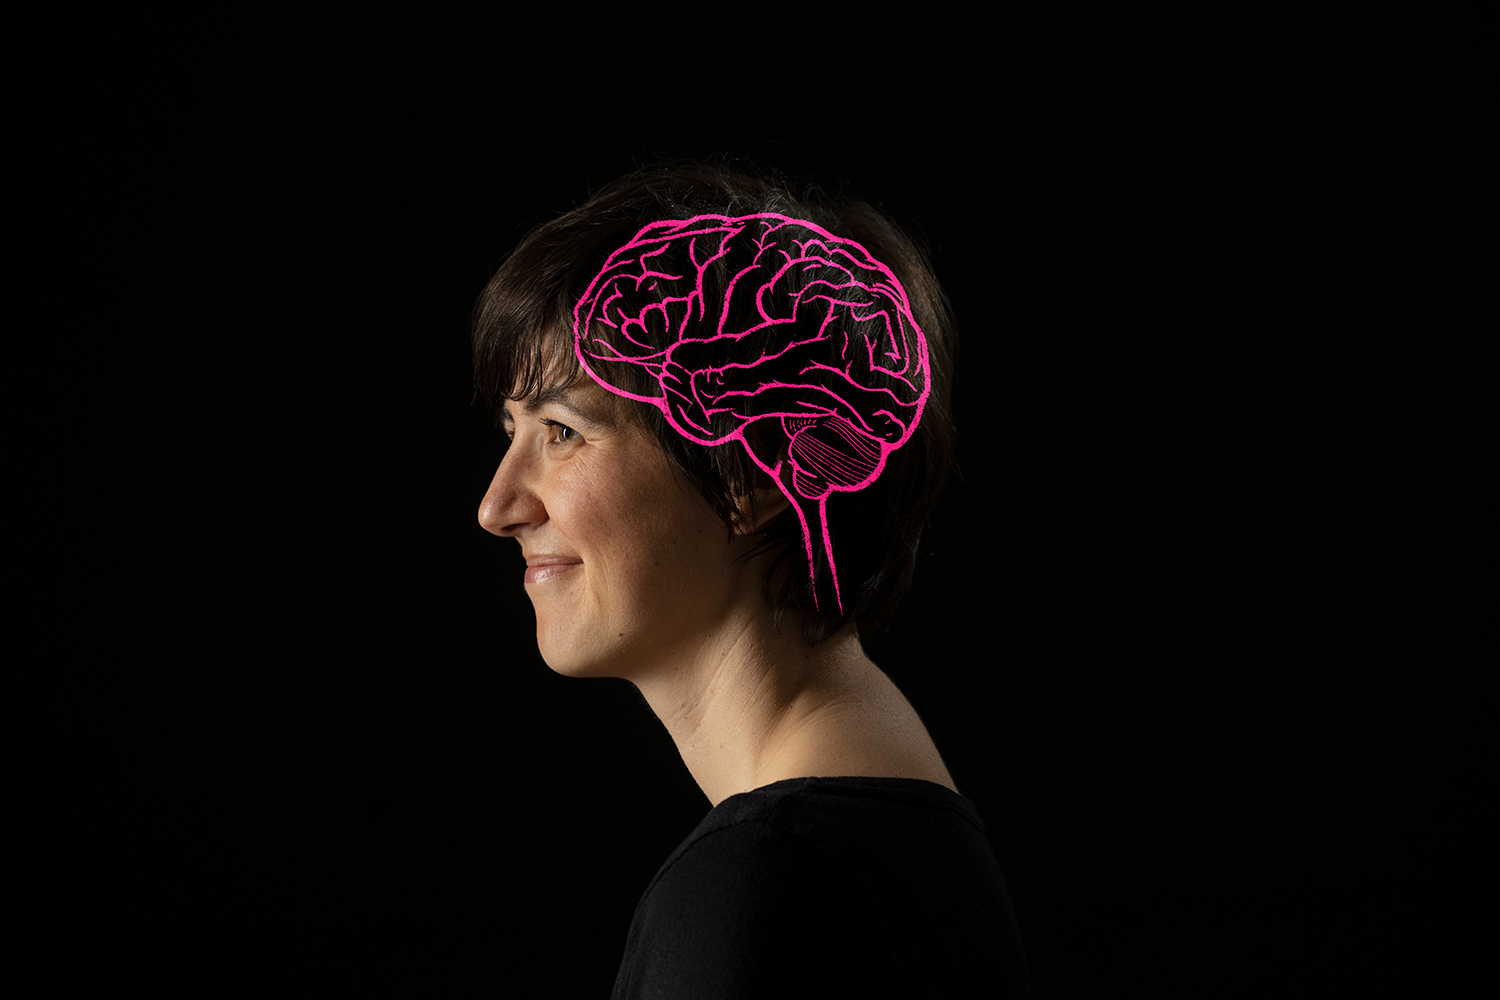 A profile portrait of Keely Muscatell, with an illustration of a brain overlaid onto it.